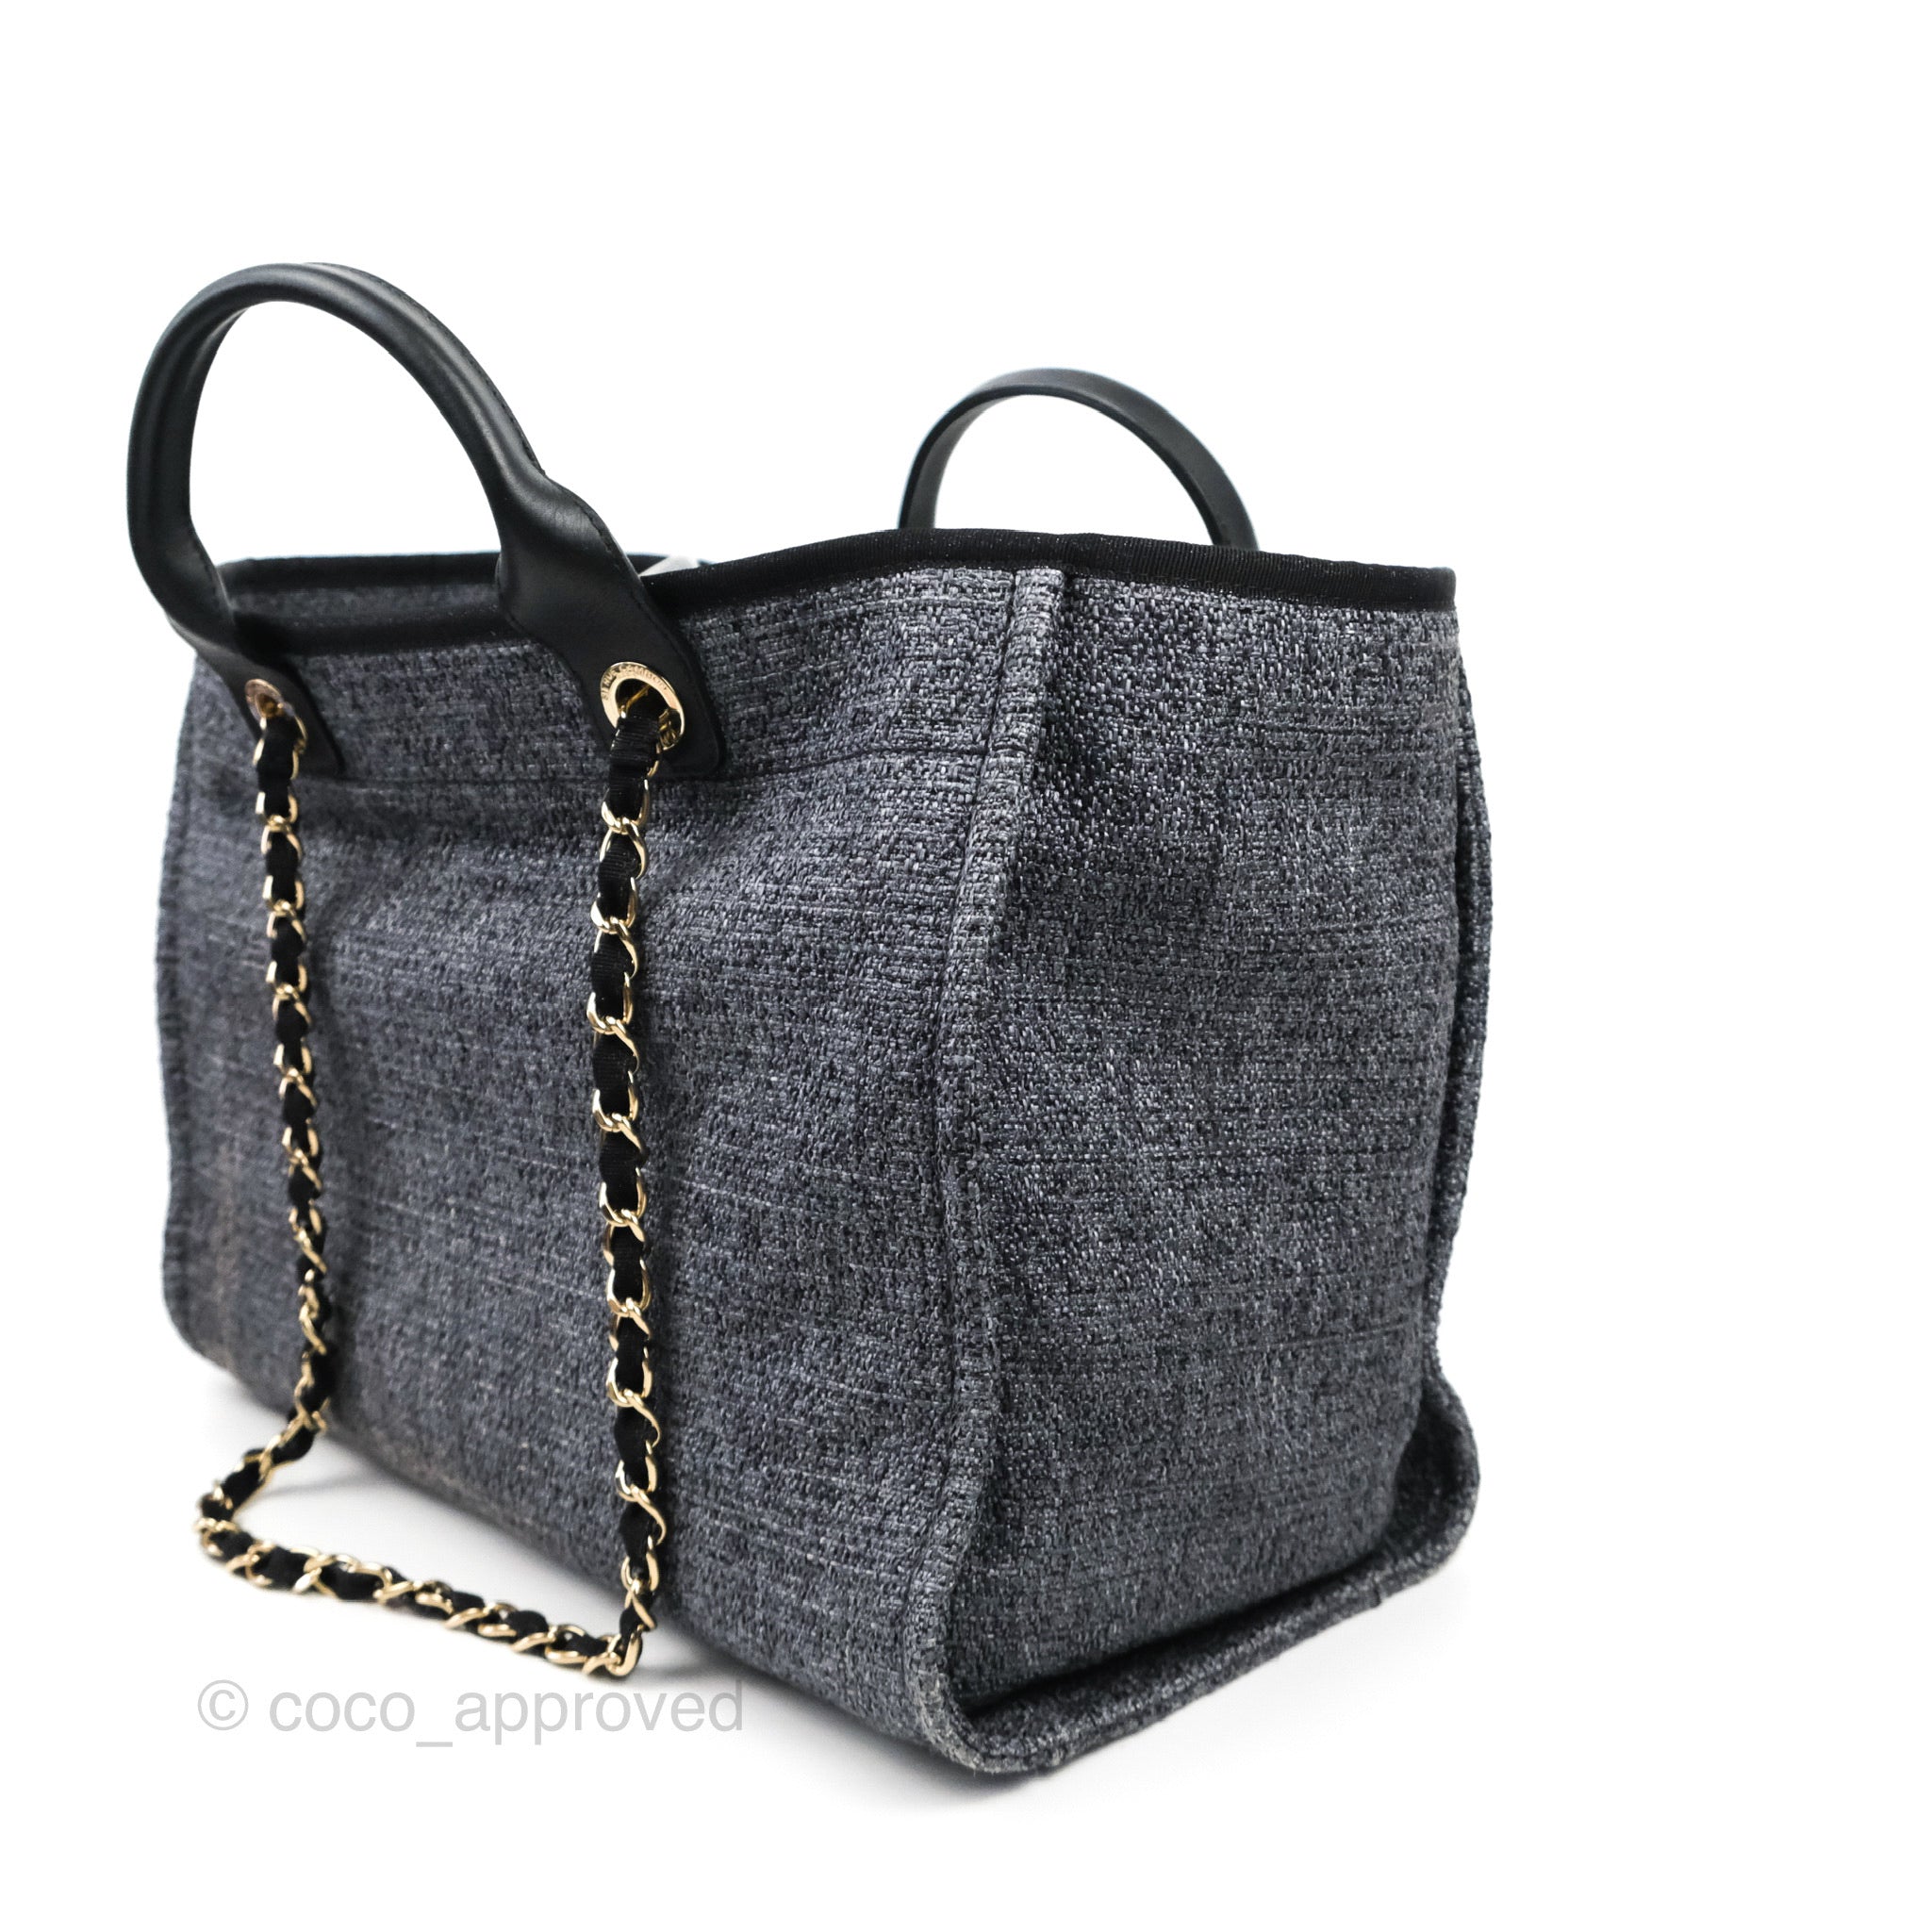 Chanel Large Charcoal Canvas With Sequins Deauville Tote